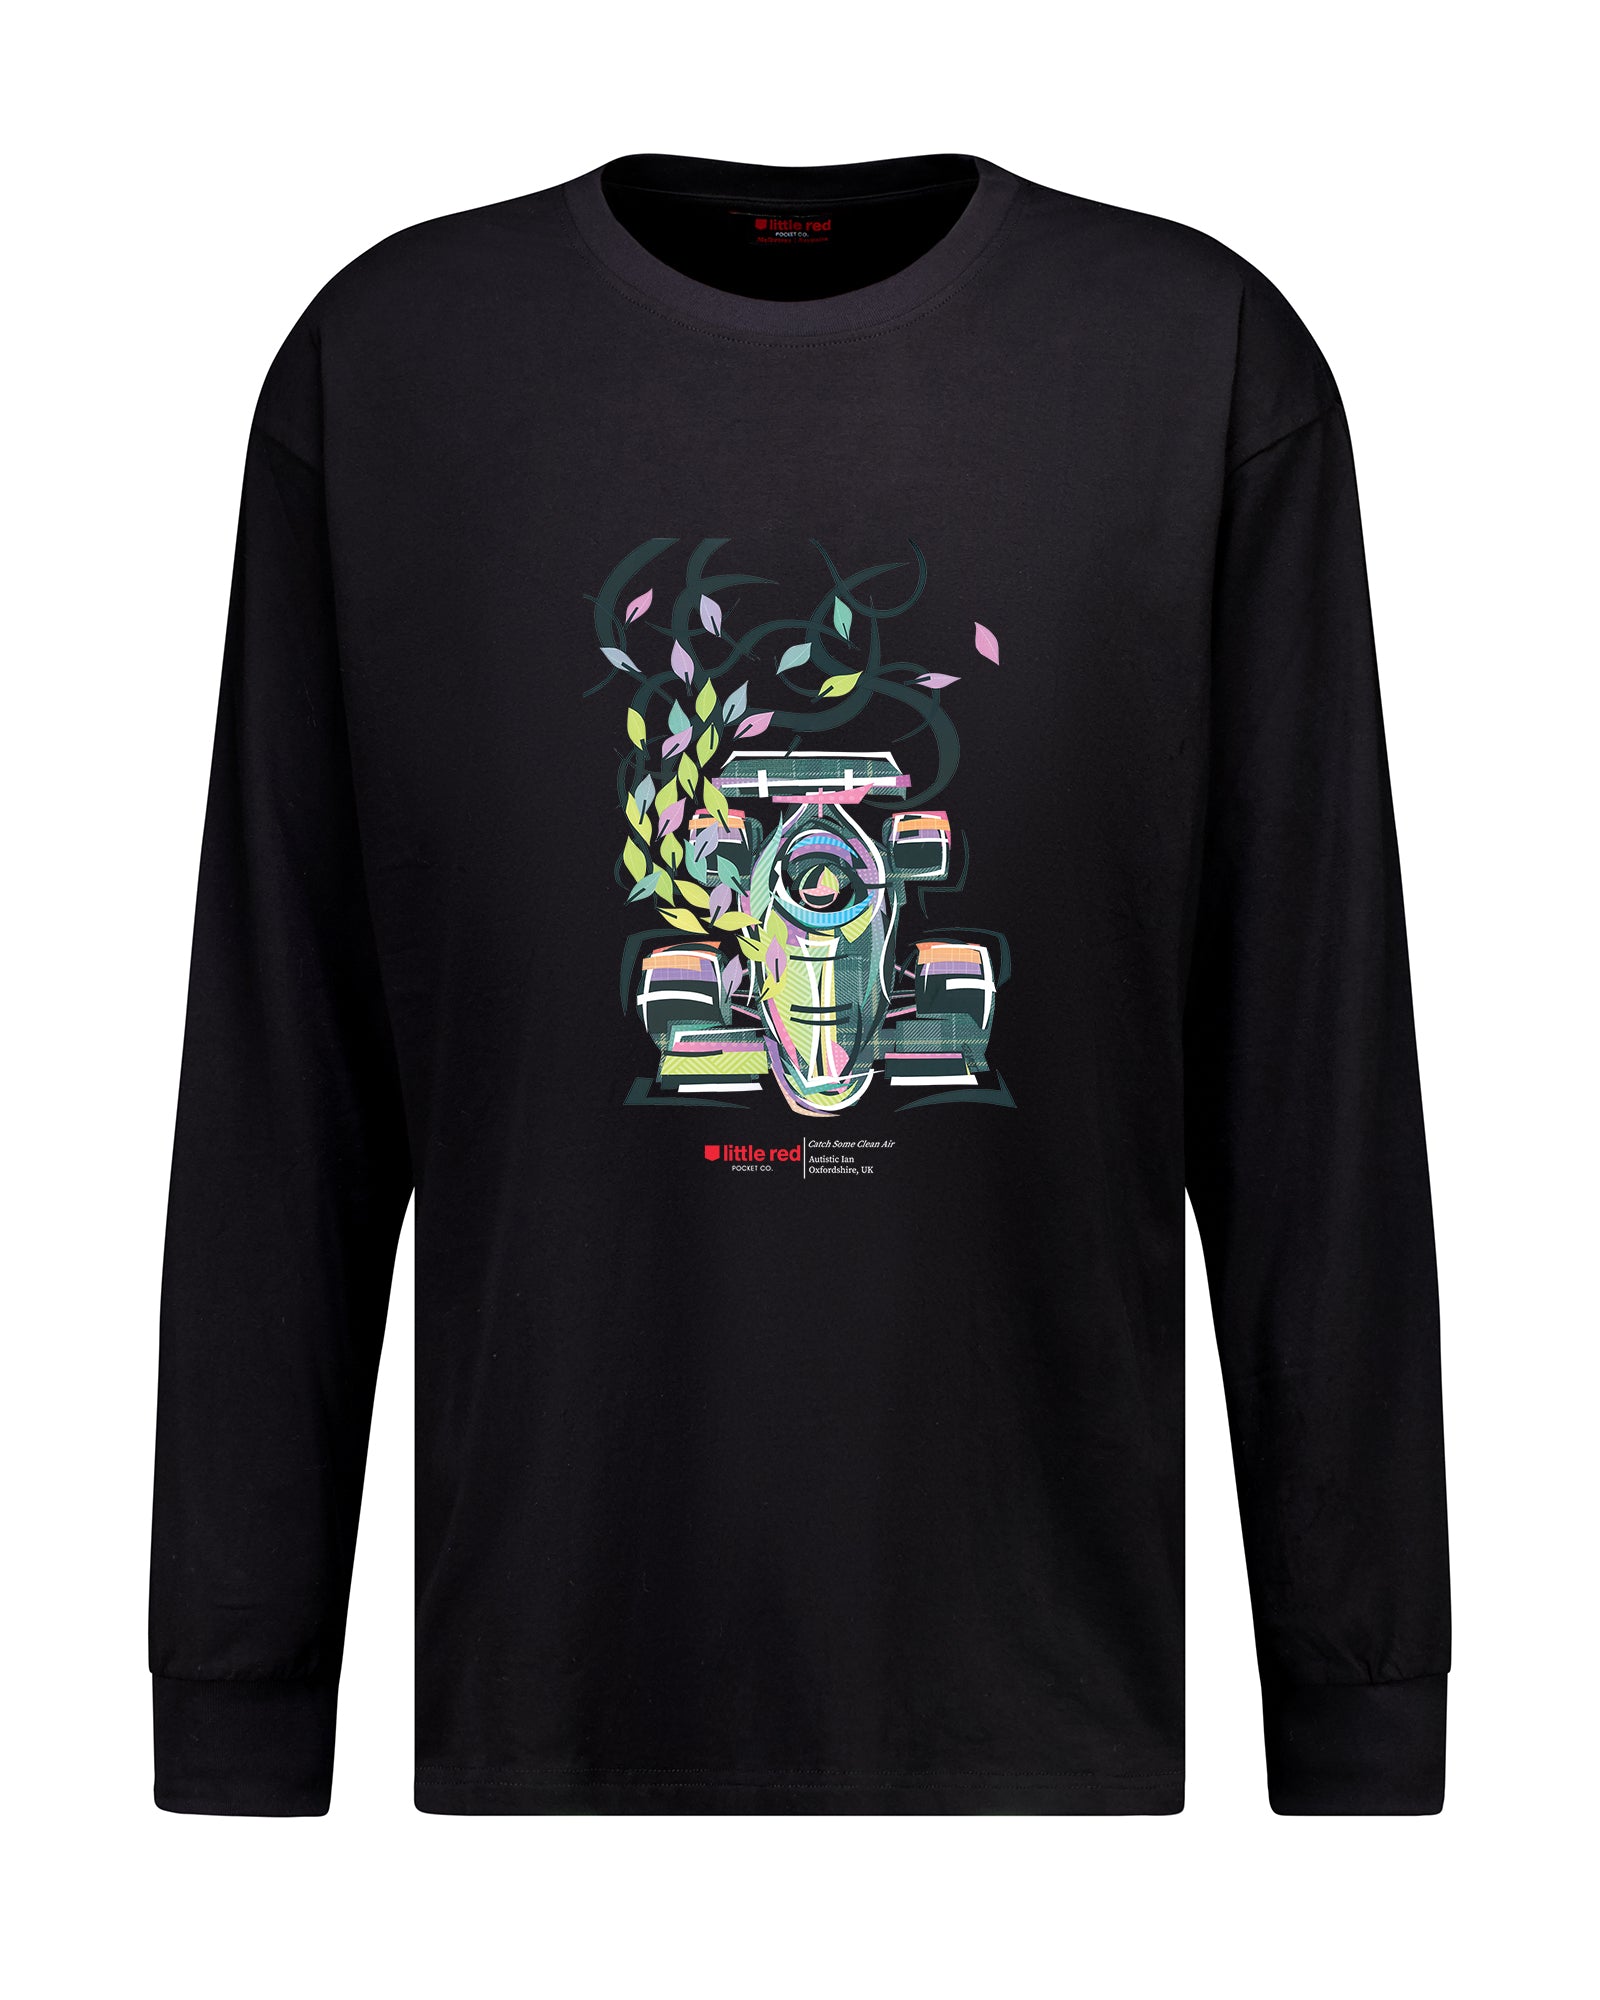 "Catch Some Clean Air" Male Long Sleeve Tee